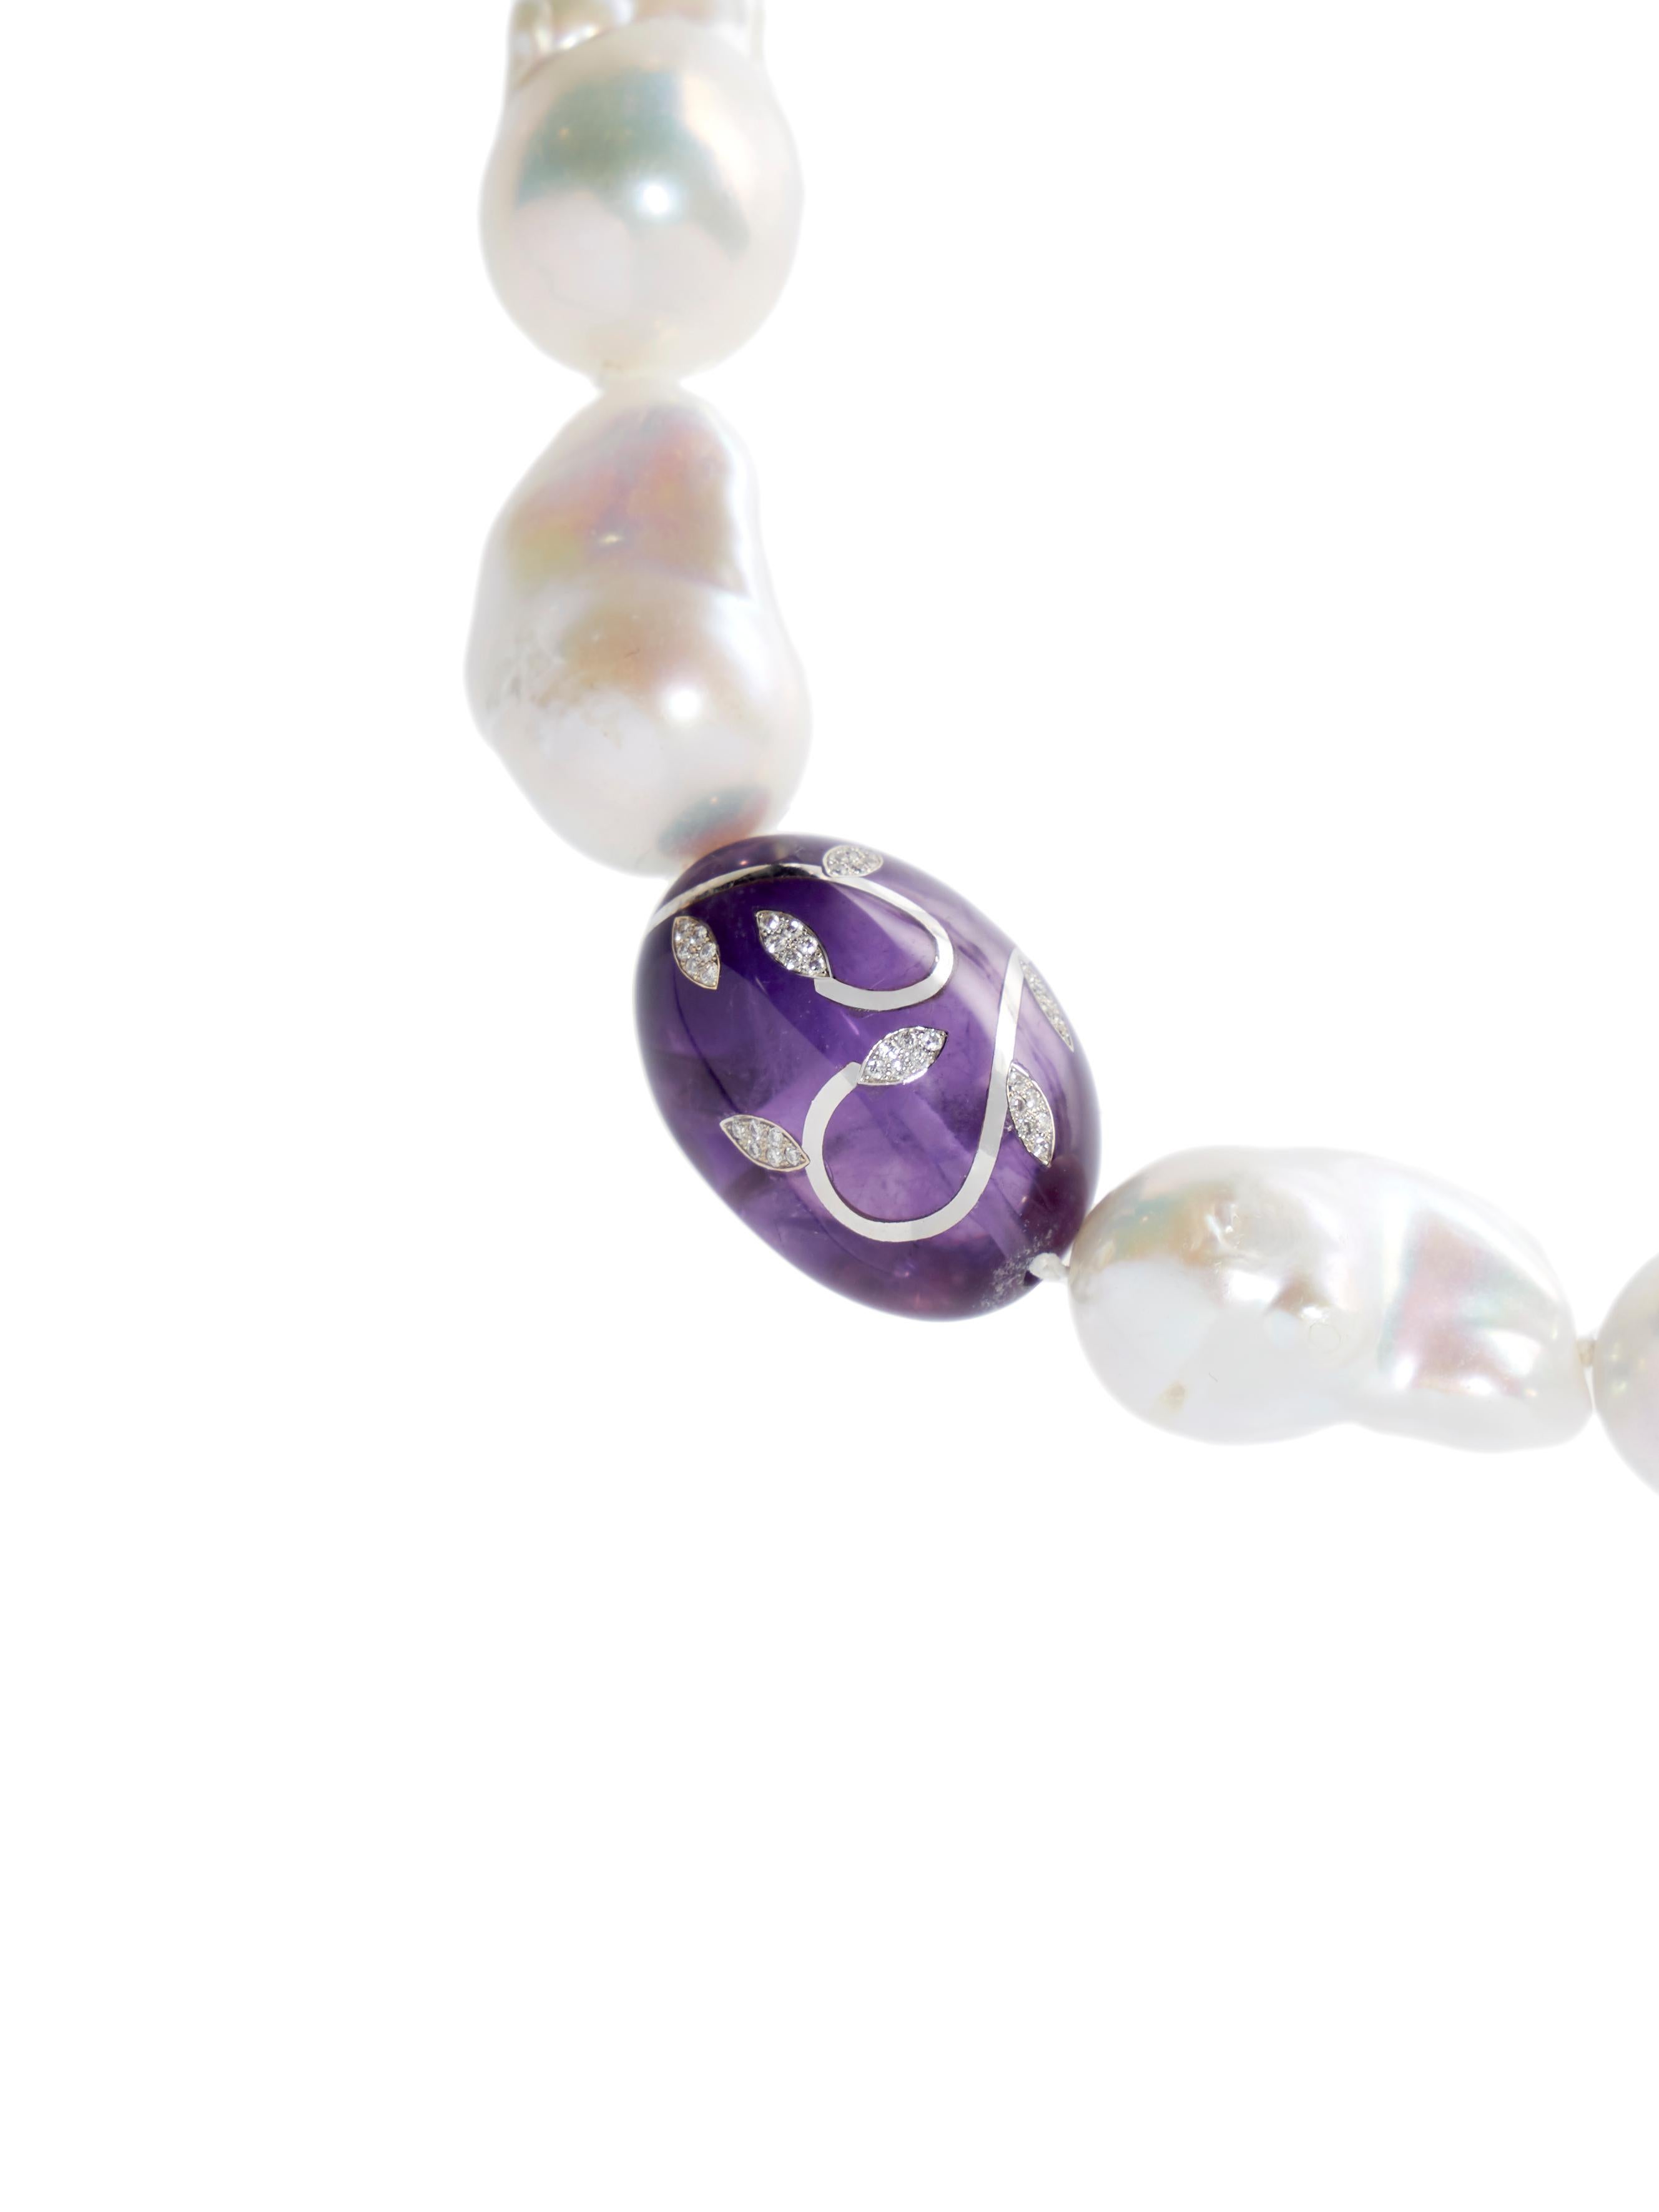 Baroque pearl necklace with a beautiful quality amethyst bead with floral decoration executed with high carat white gold inlay and set with faceted diamonds.

These baroque pearls are of a very good quality with a beautiful luster and are averaging